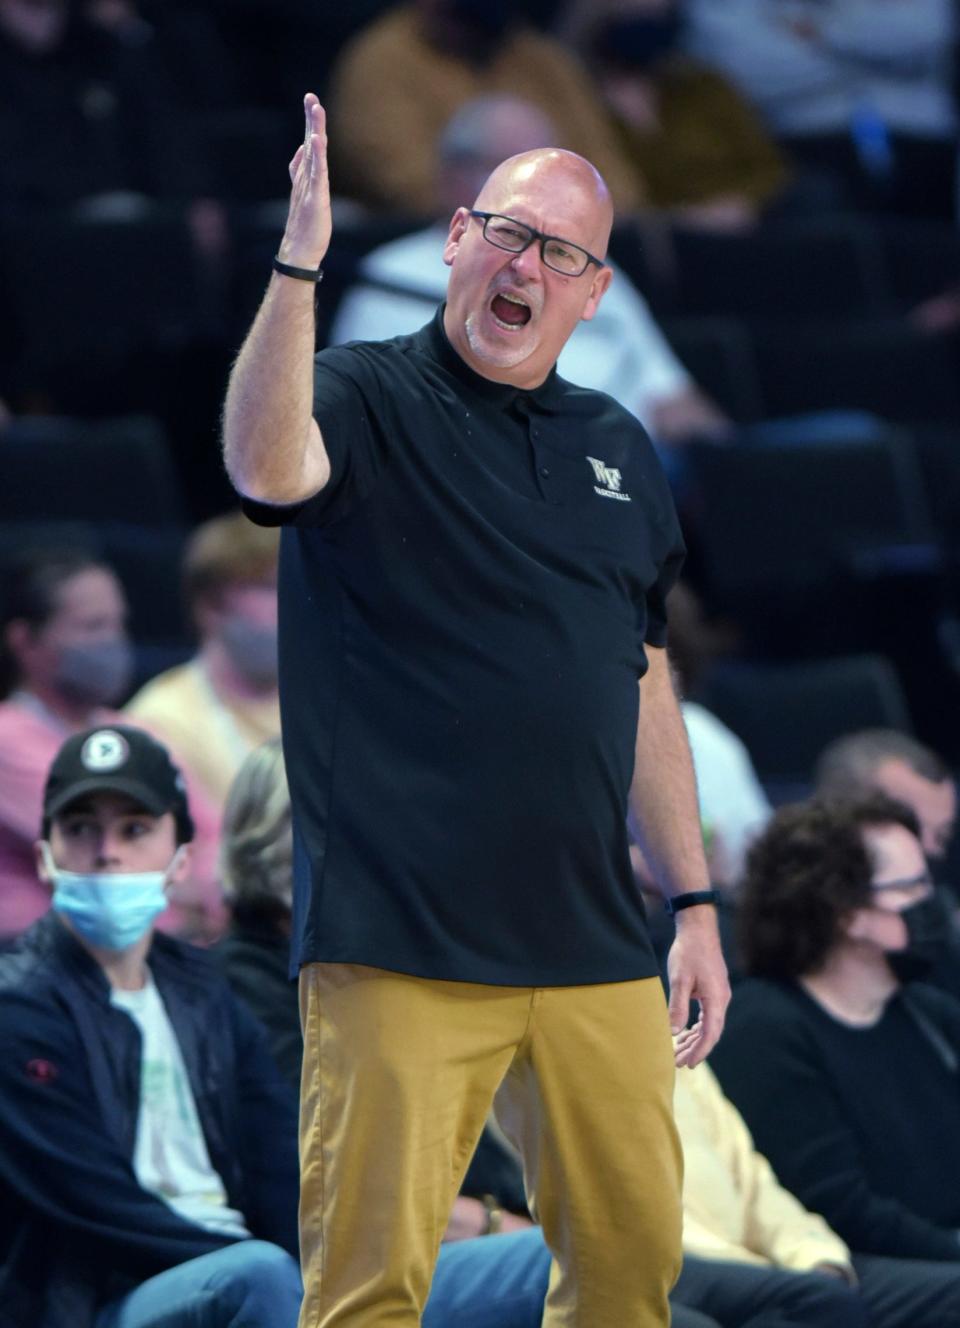 Wake Forest coach Steve Forbes gestures during the first half of the team's NCAA college basketball game against Charleston Southern on Wednesday, Nov. 17, 2021, in Winston-Salem, N.C. (Walt Unks/The Winston-Salem Journal via AP)